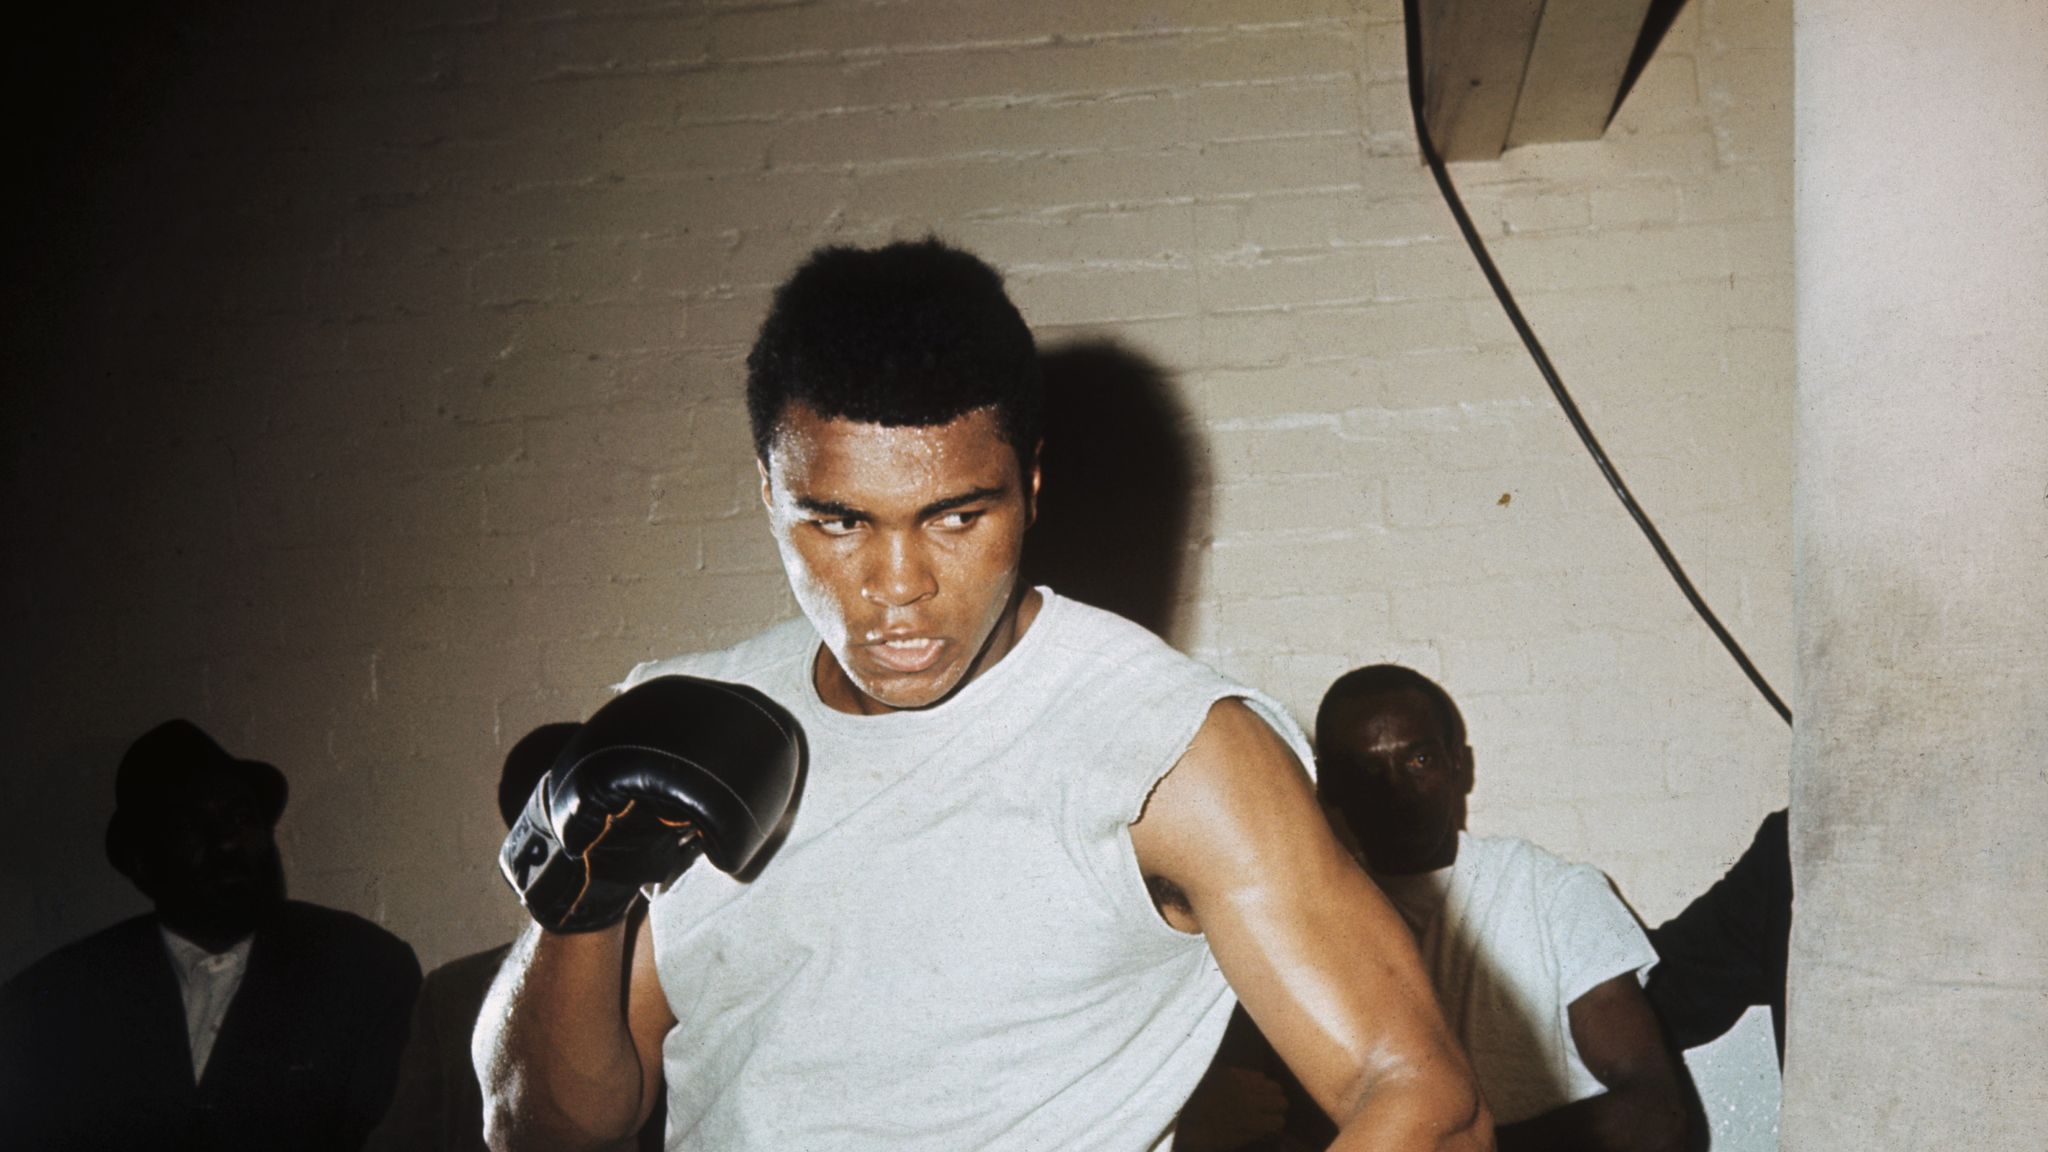 Muhammad Ali S Dark Side Emerges In What S My Name Fight With Ernie Terrell On February 6 1967 Boxing News Sky Sports